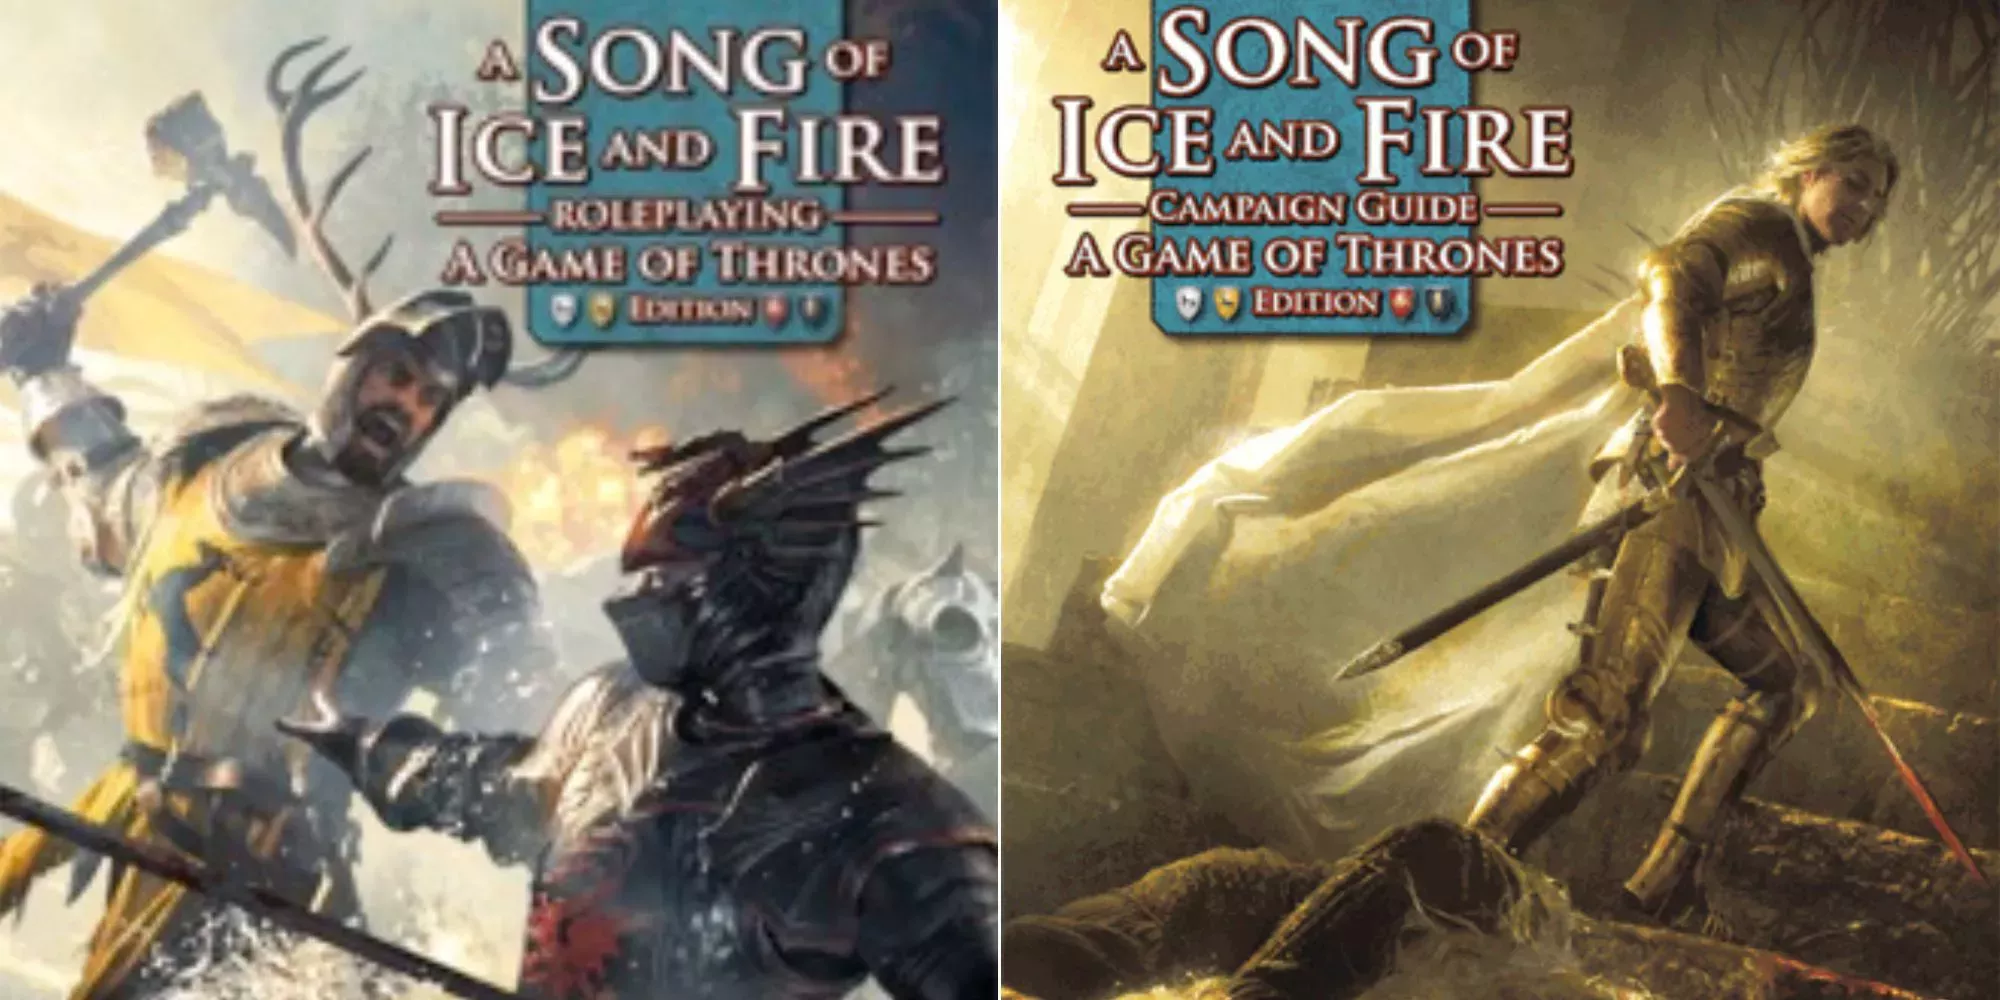 A Song Of Ice And Fire RPG